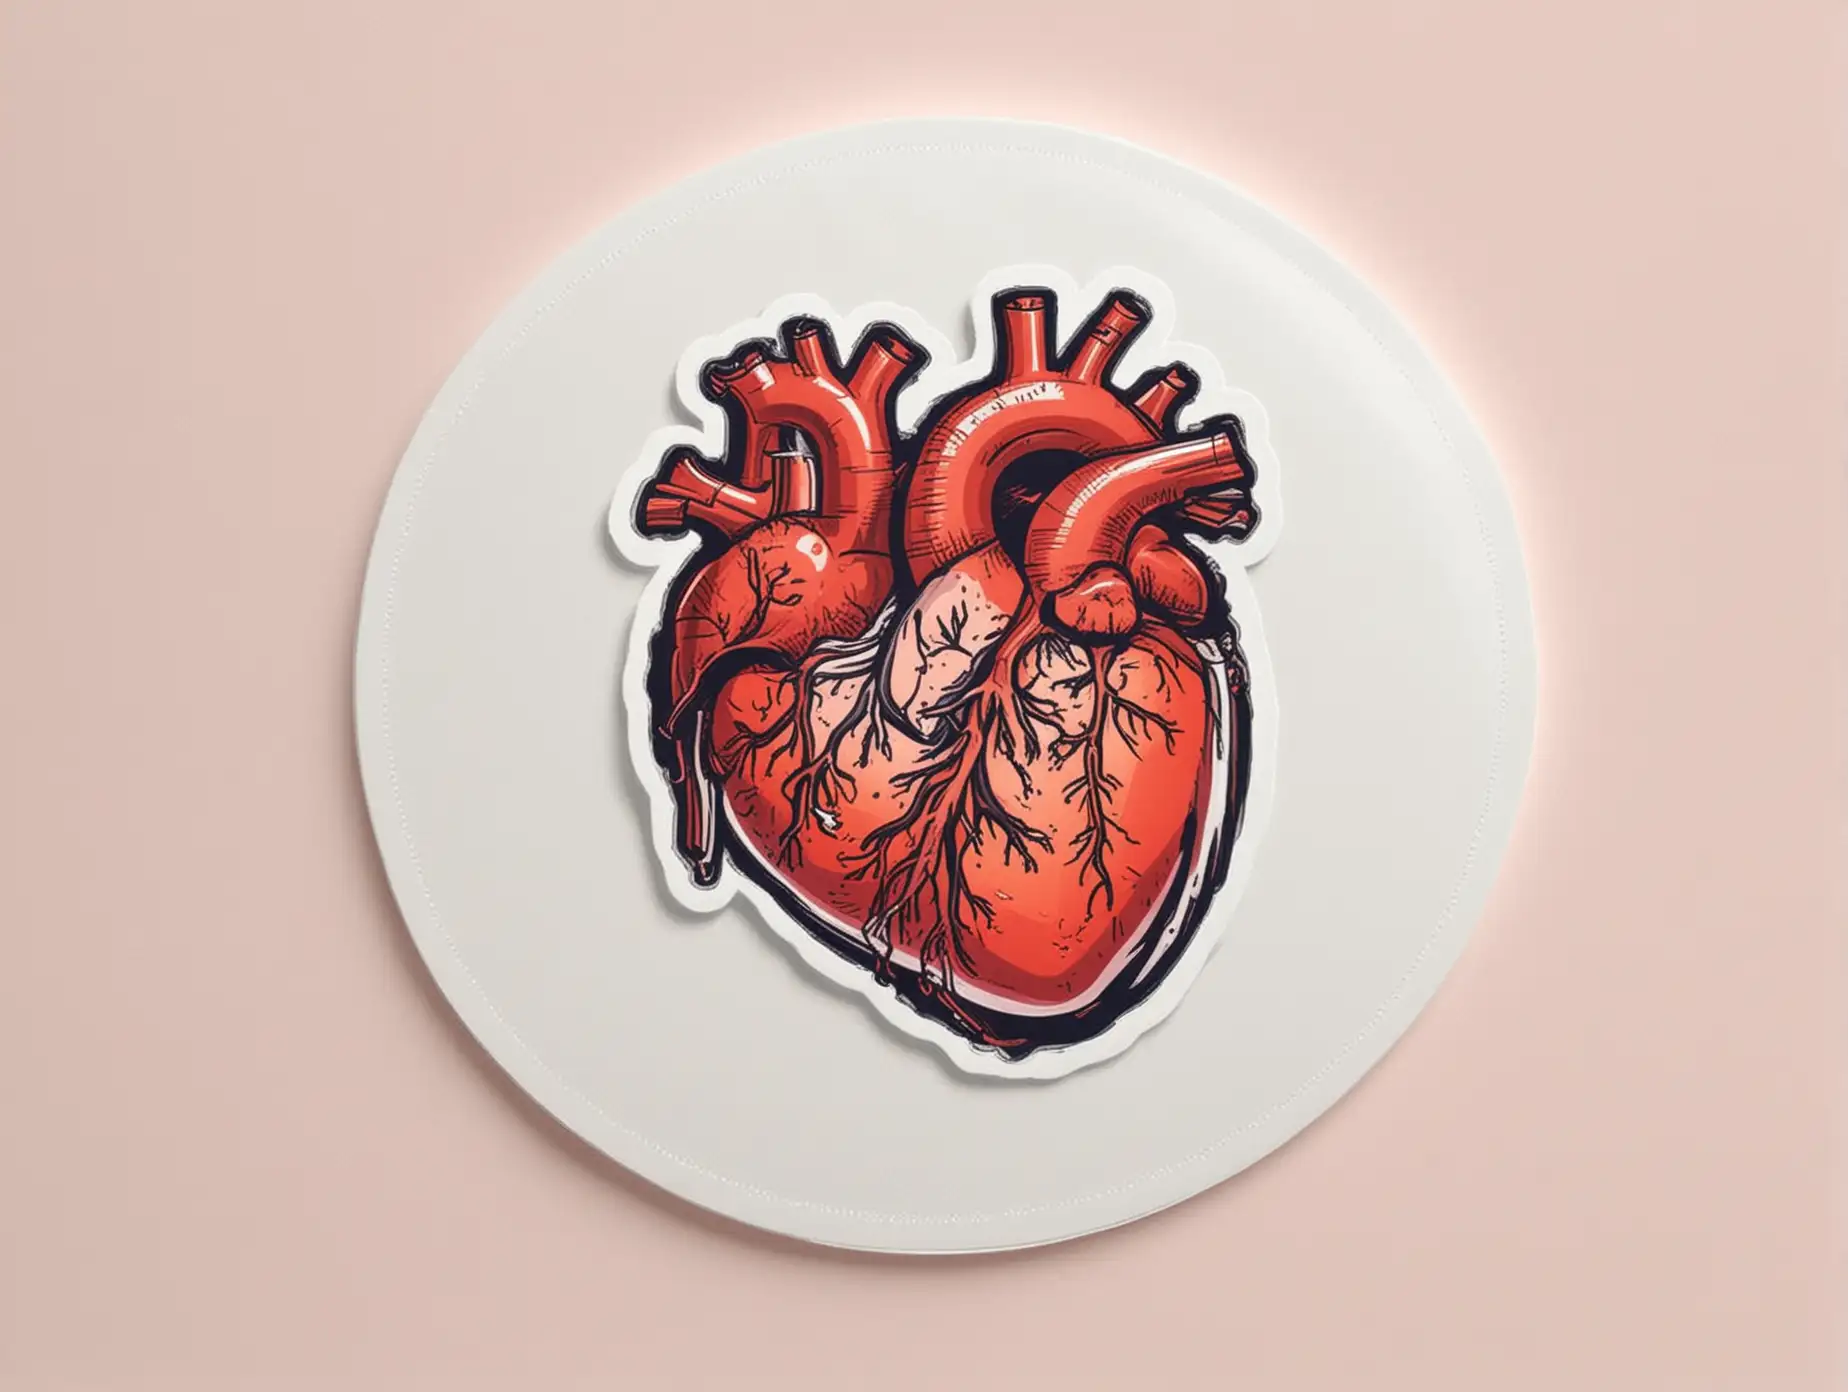 /imagine prompt: Heart Disease Sticker, Round Sticker, Cheerful, Soft Color, Contour, Vector, White Background, Detailed

